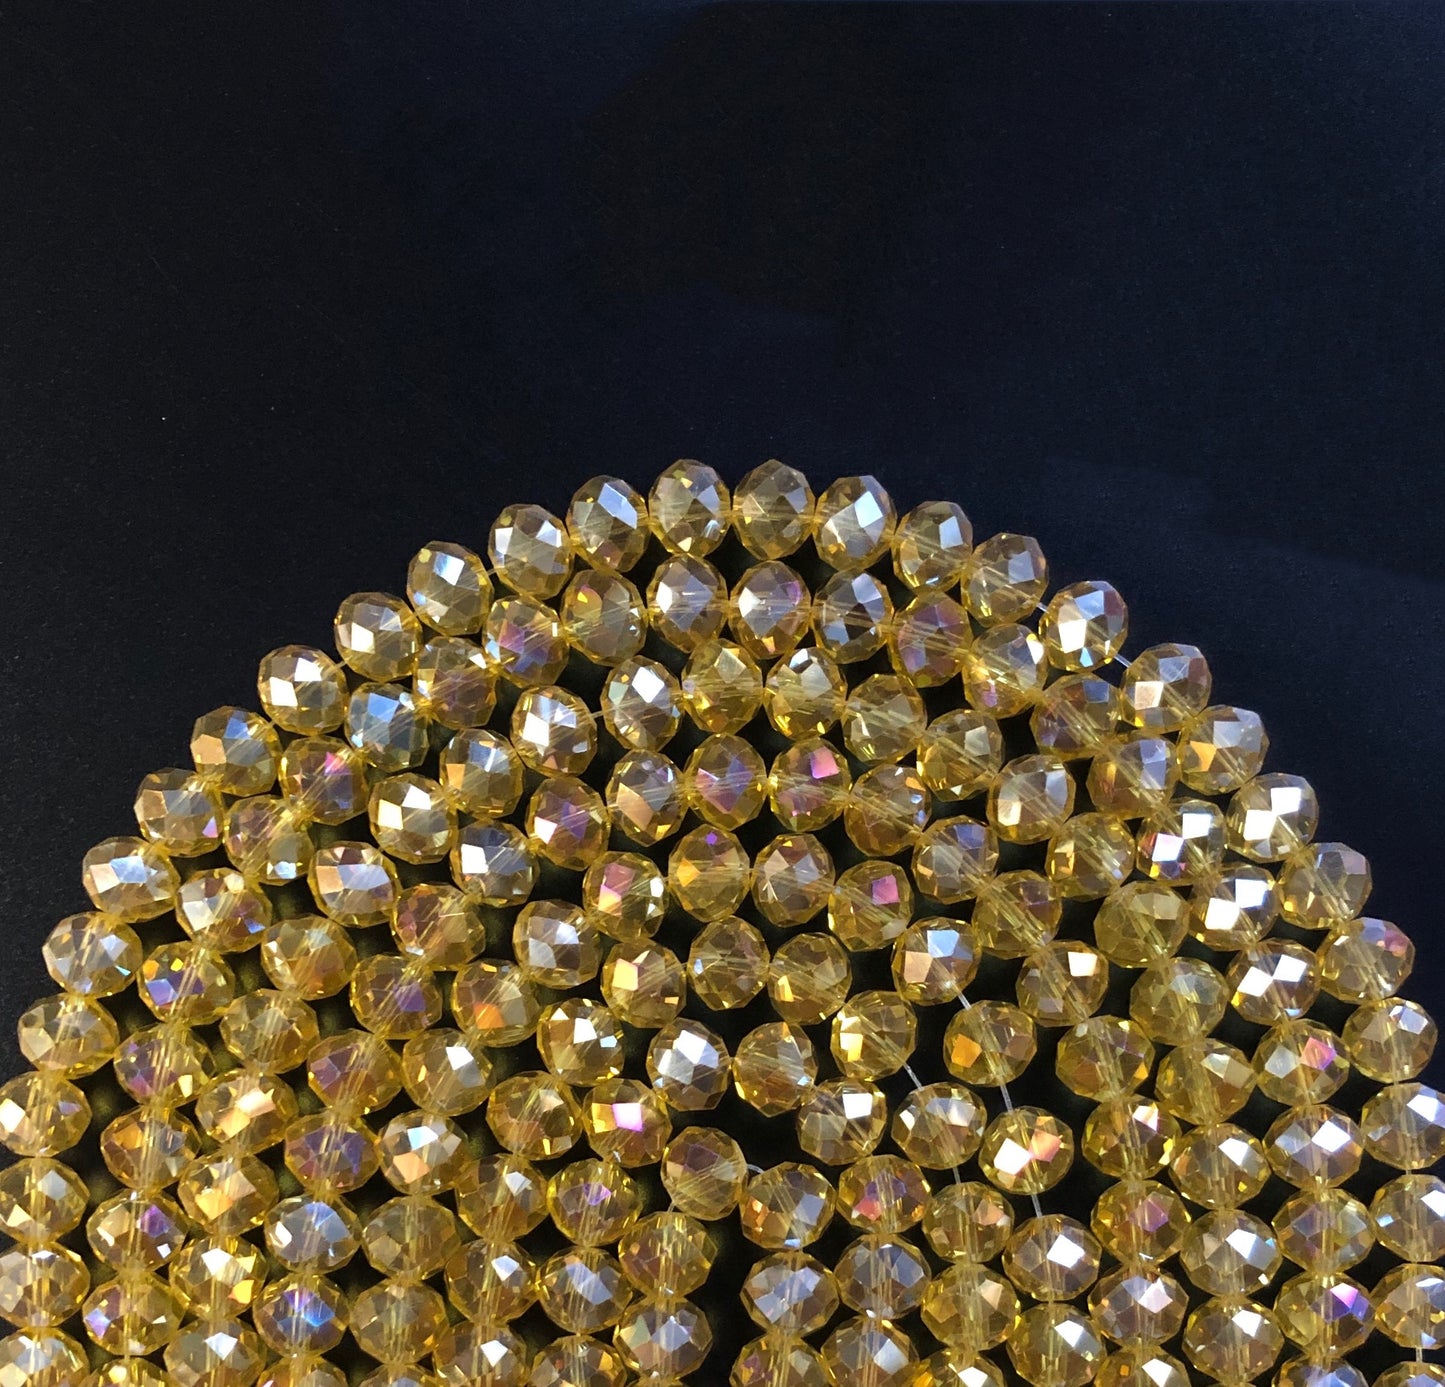 2 Strands/lot 10mm Clear Yellow AB Faceted Glass Beads Clear Yellow AB Glass Beads Faceted Glass Beads Charms Beads Beyond